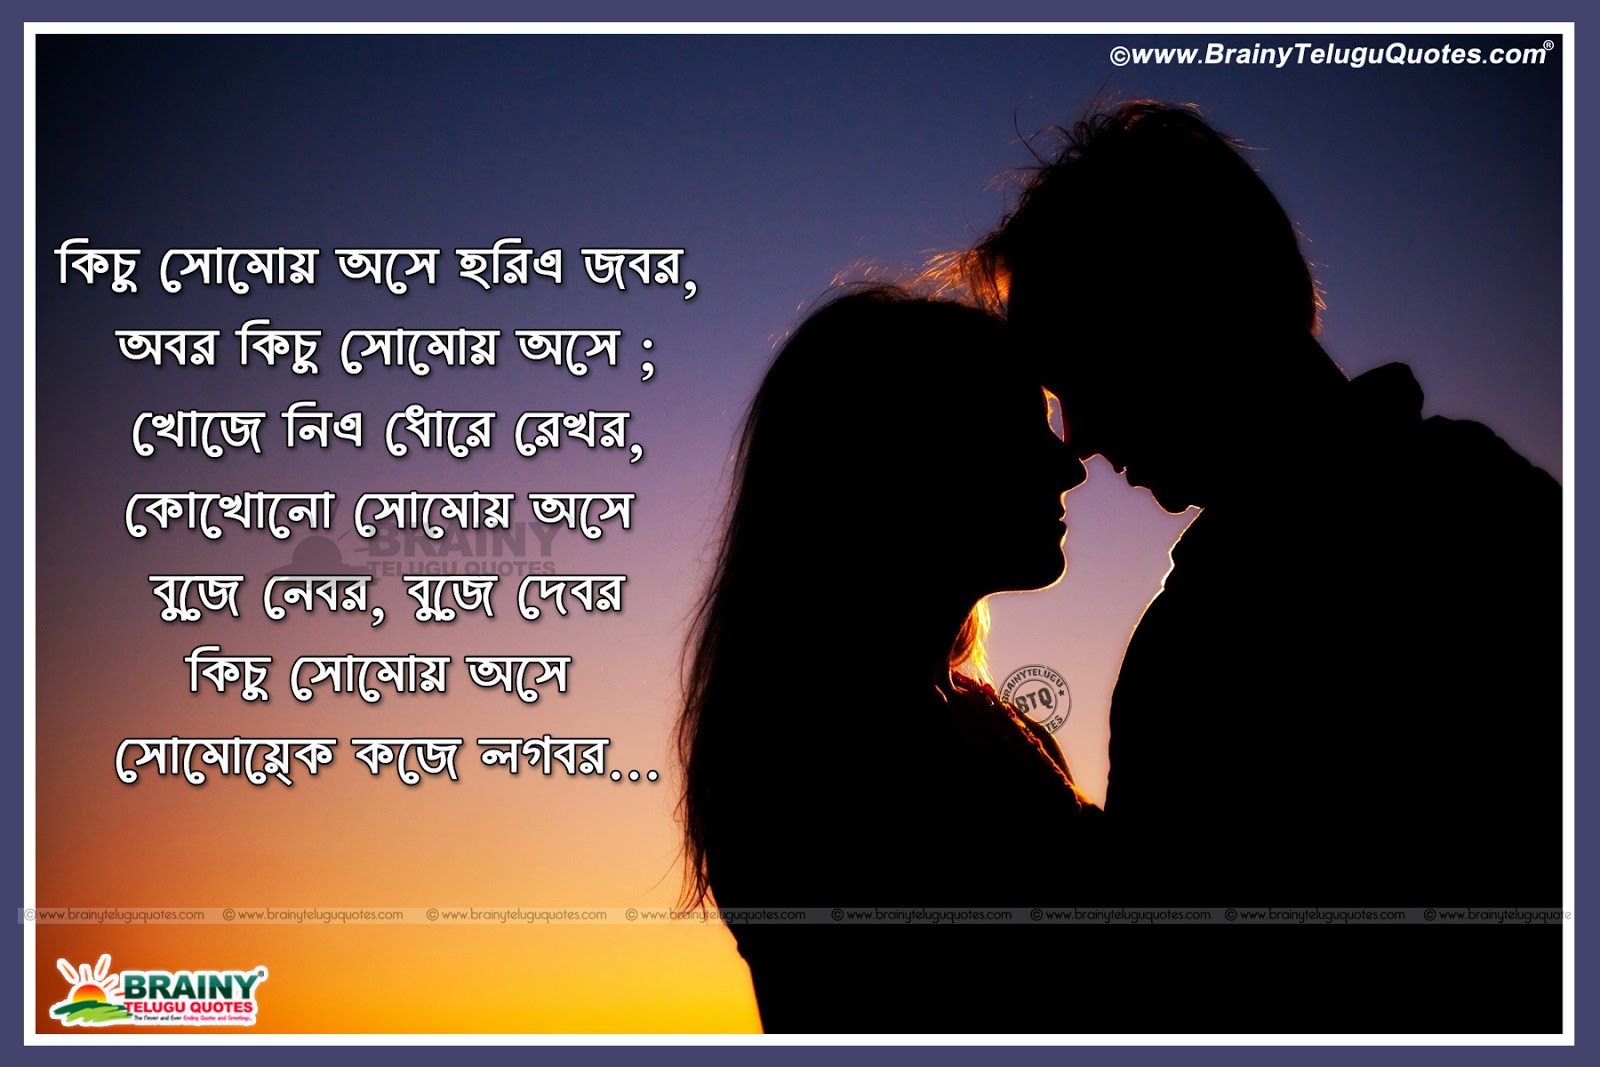 Love Quotes in Bengali Bengali Love Messages Best love quotes hd wallpapers in Bengali Bengali Love Mobile Status Messages Love Thoughts in Bengali